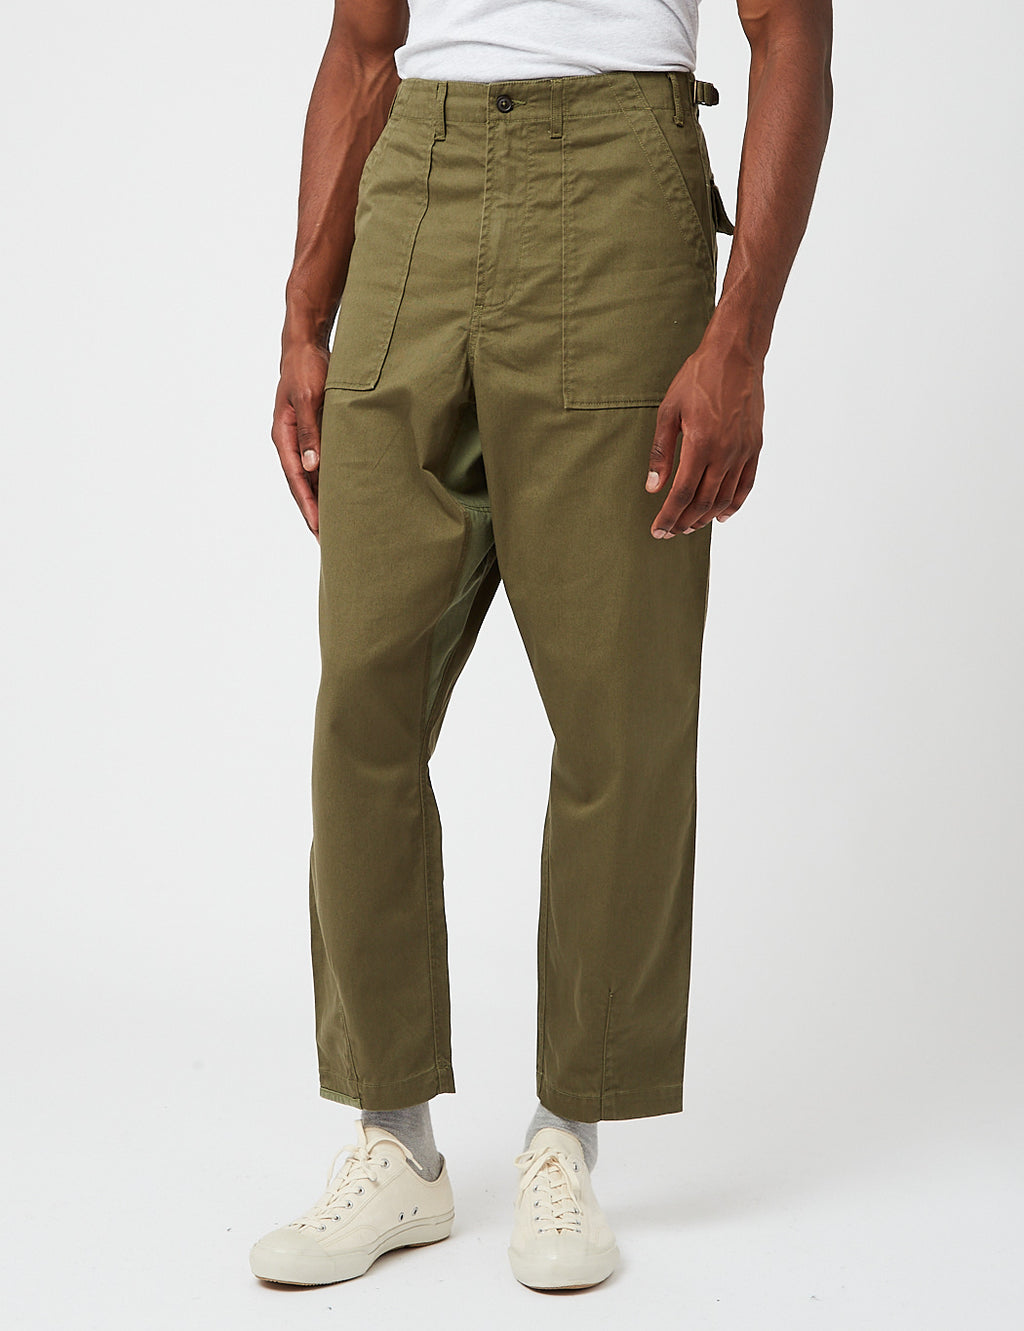 Universal Works Trousers / Oxford Pant / Dromedary - c r i s